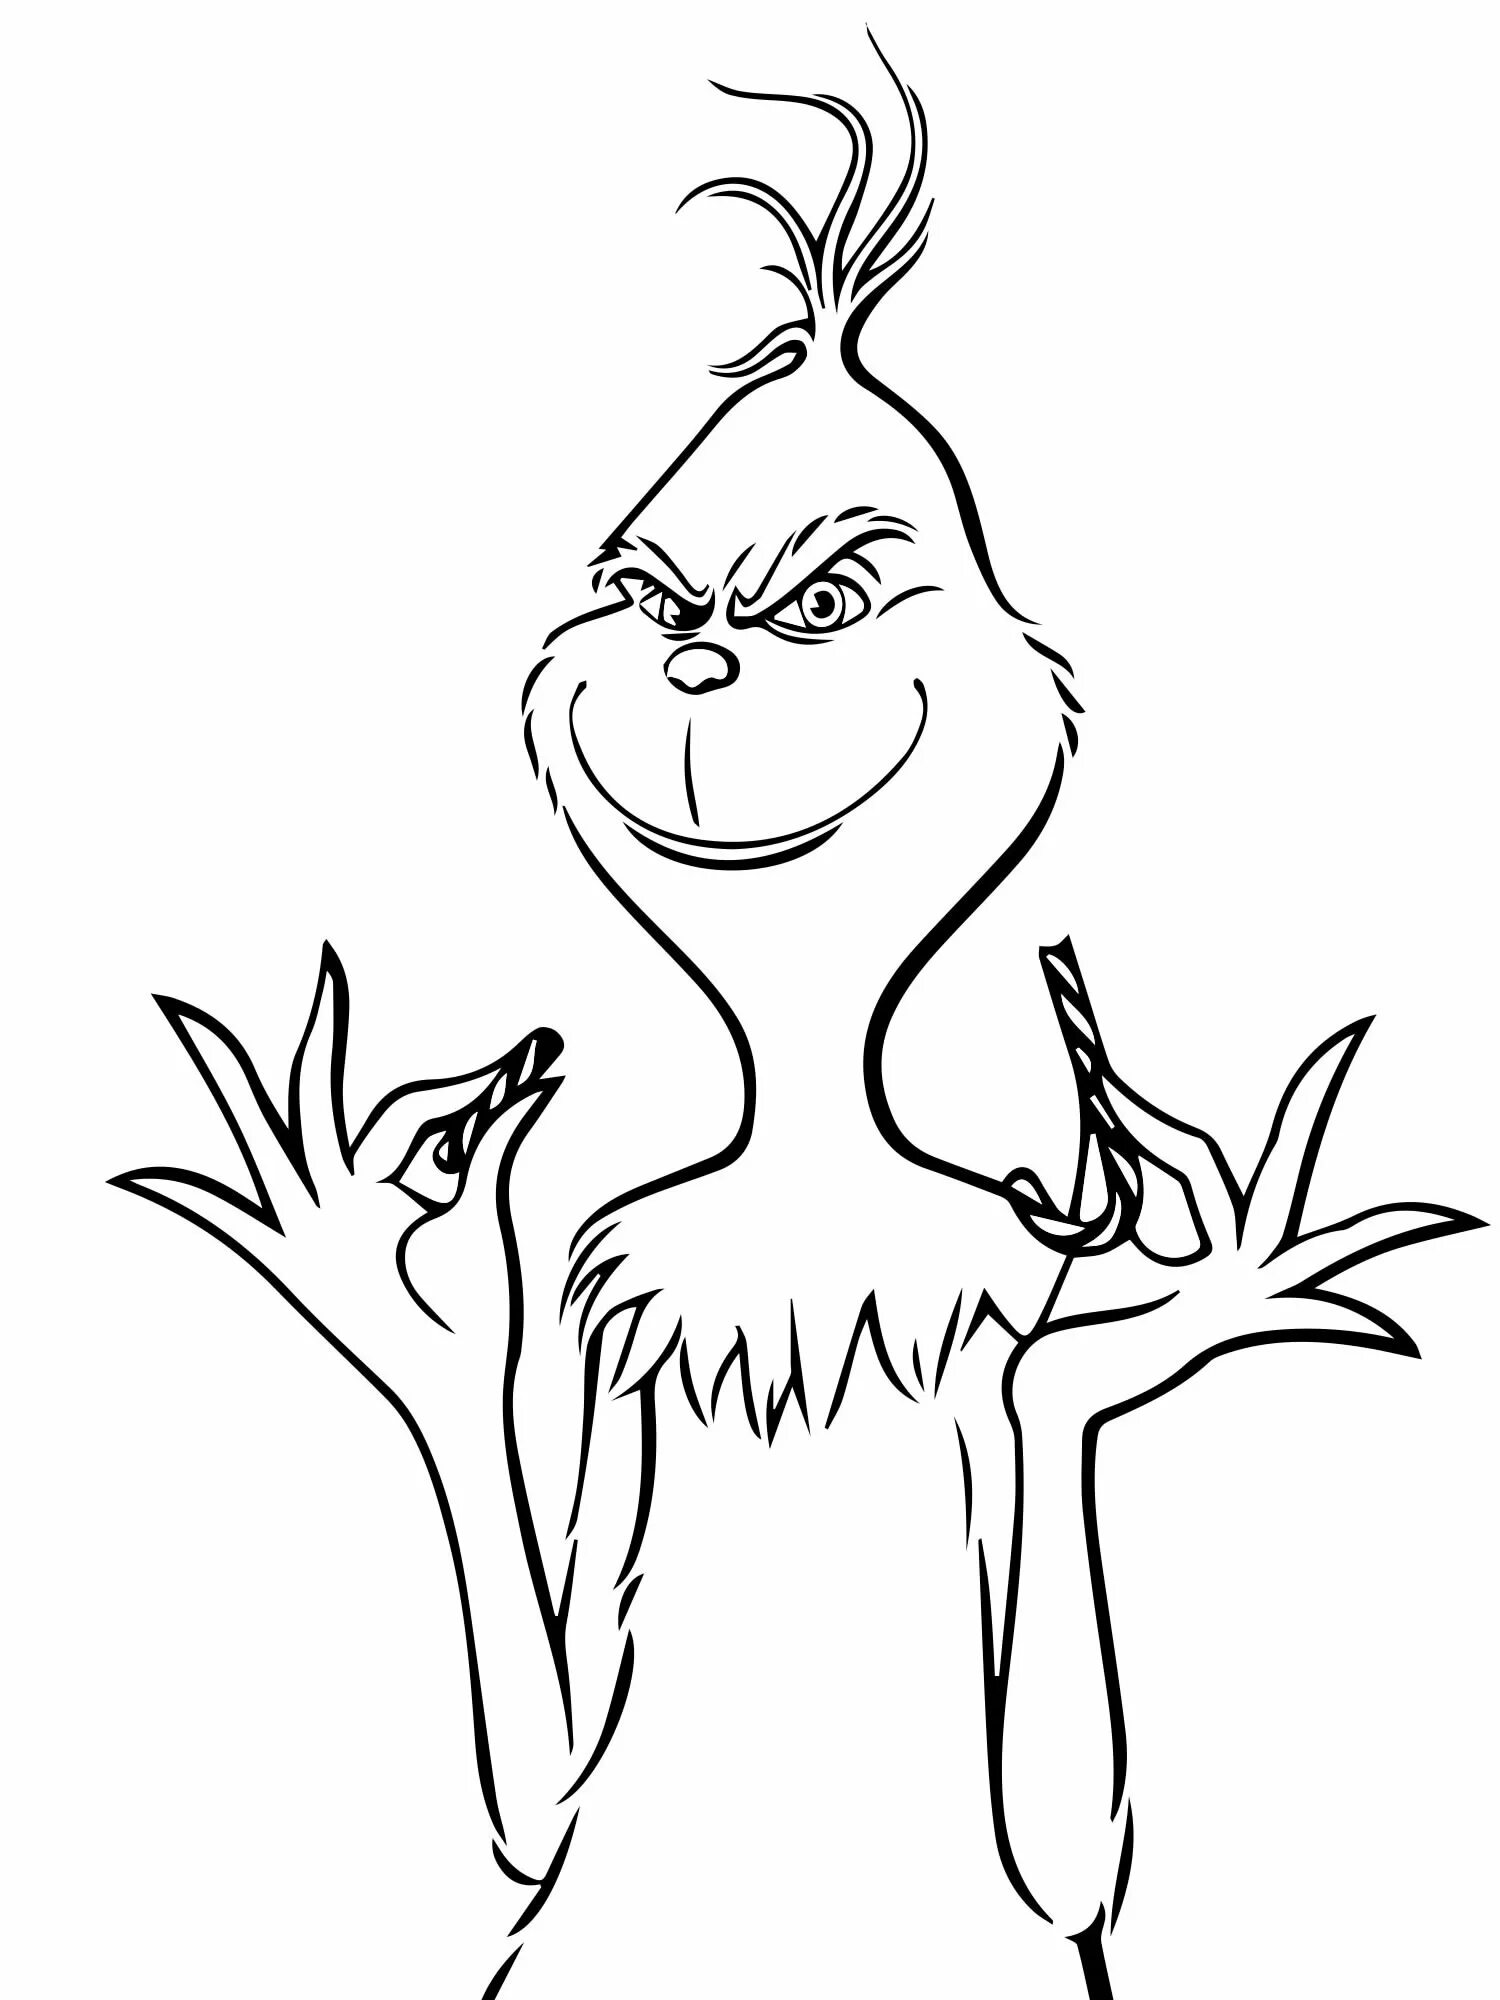 Grinch drawing #7